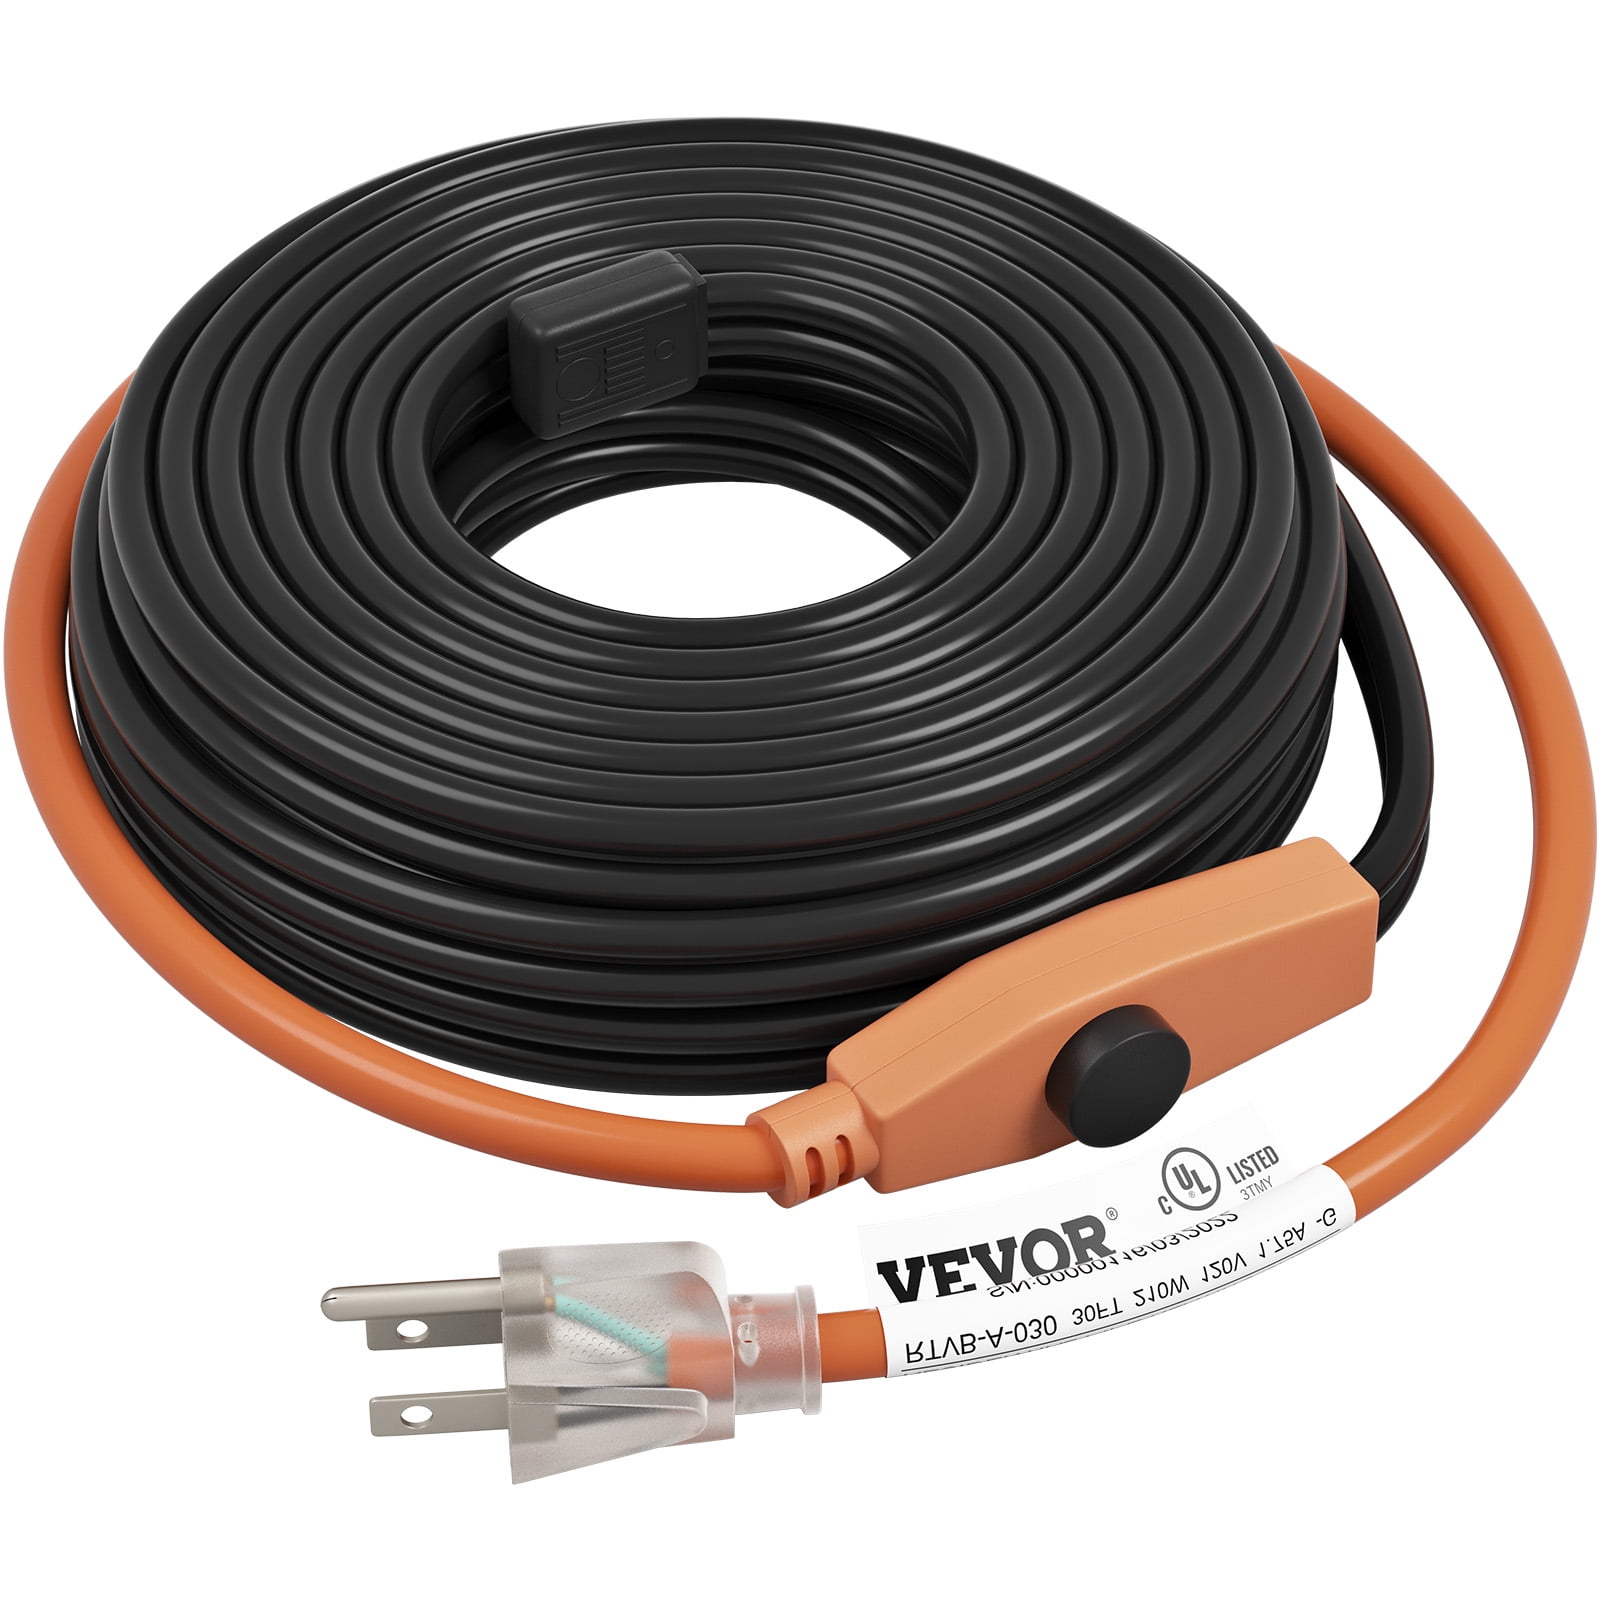 HEATIT 7FT Heat Tape for Water Pipes Roof and Gutters Heating Cable with  6ft Lighted Plug